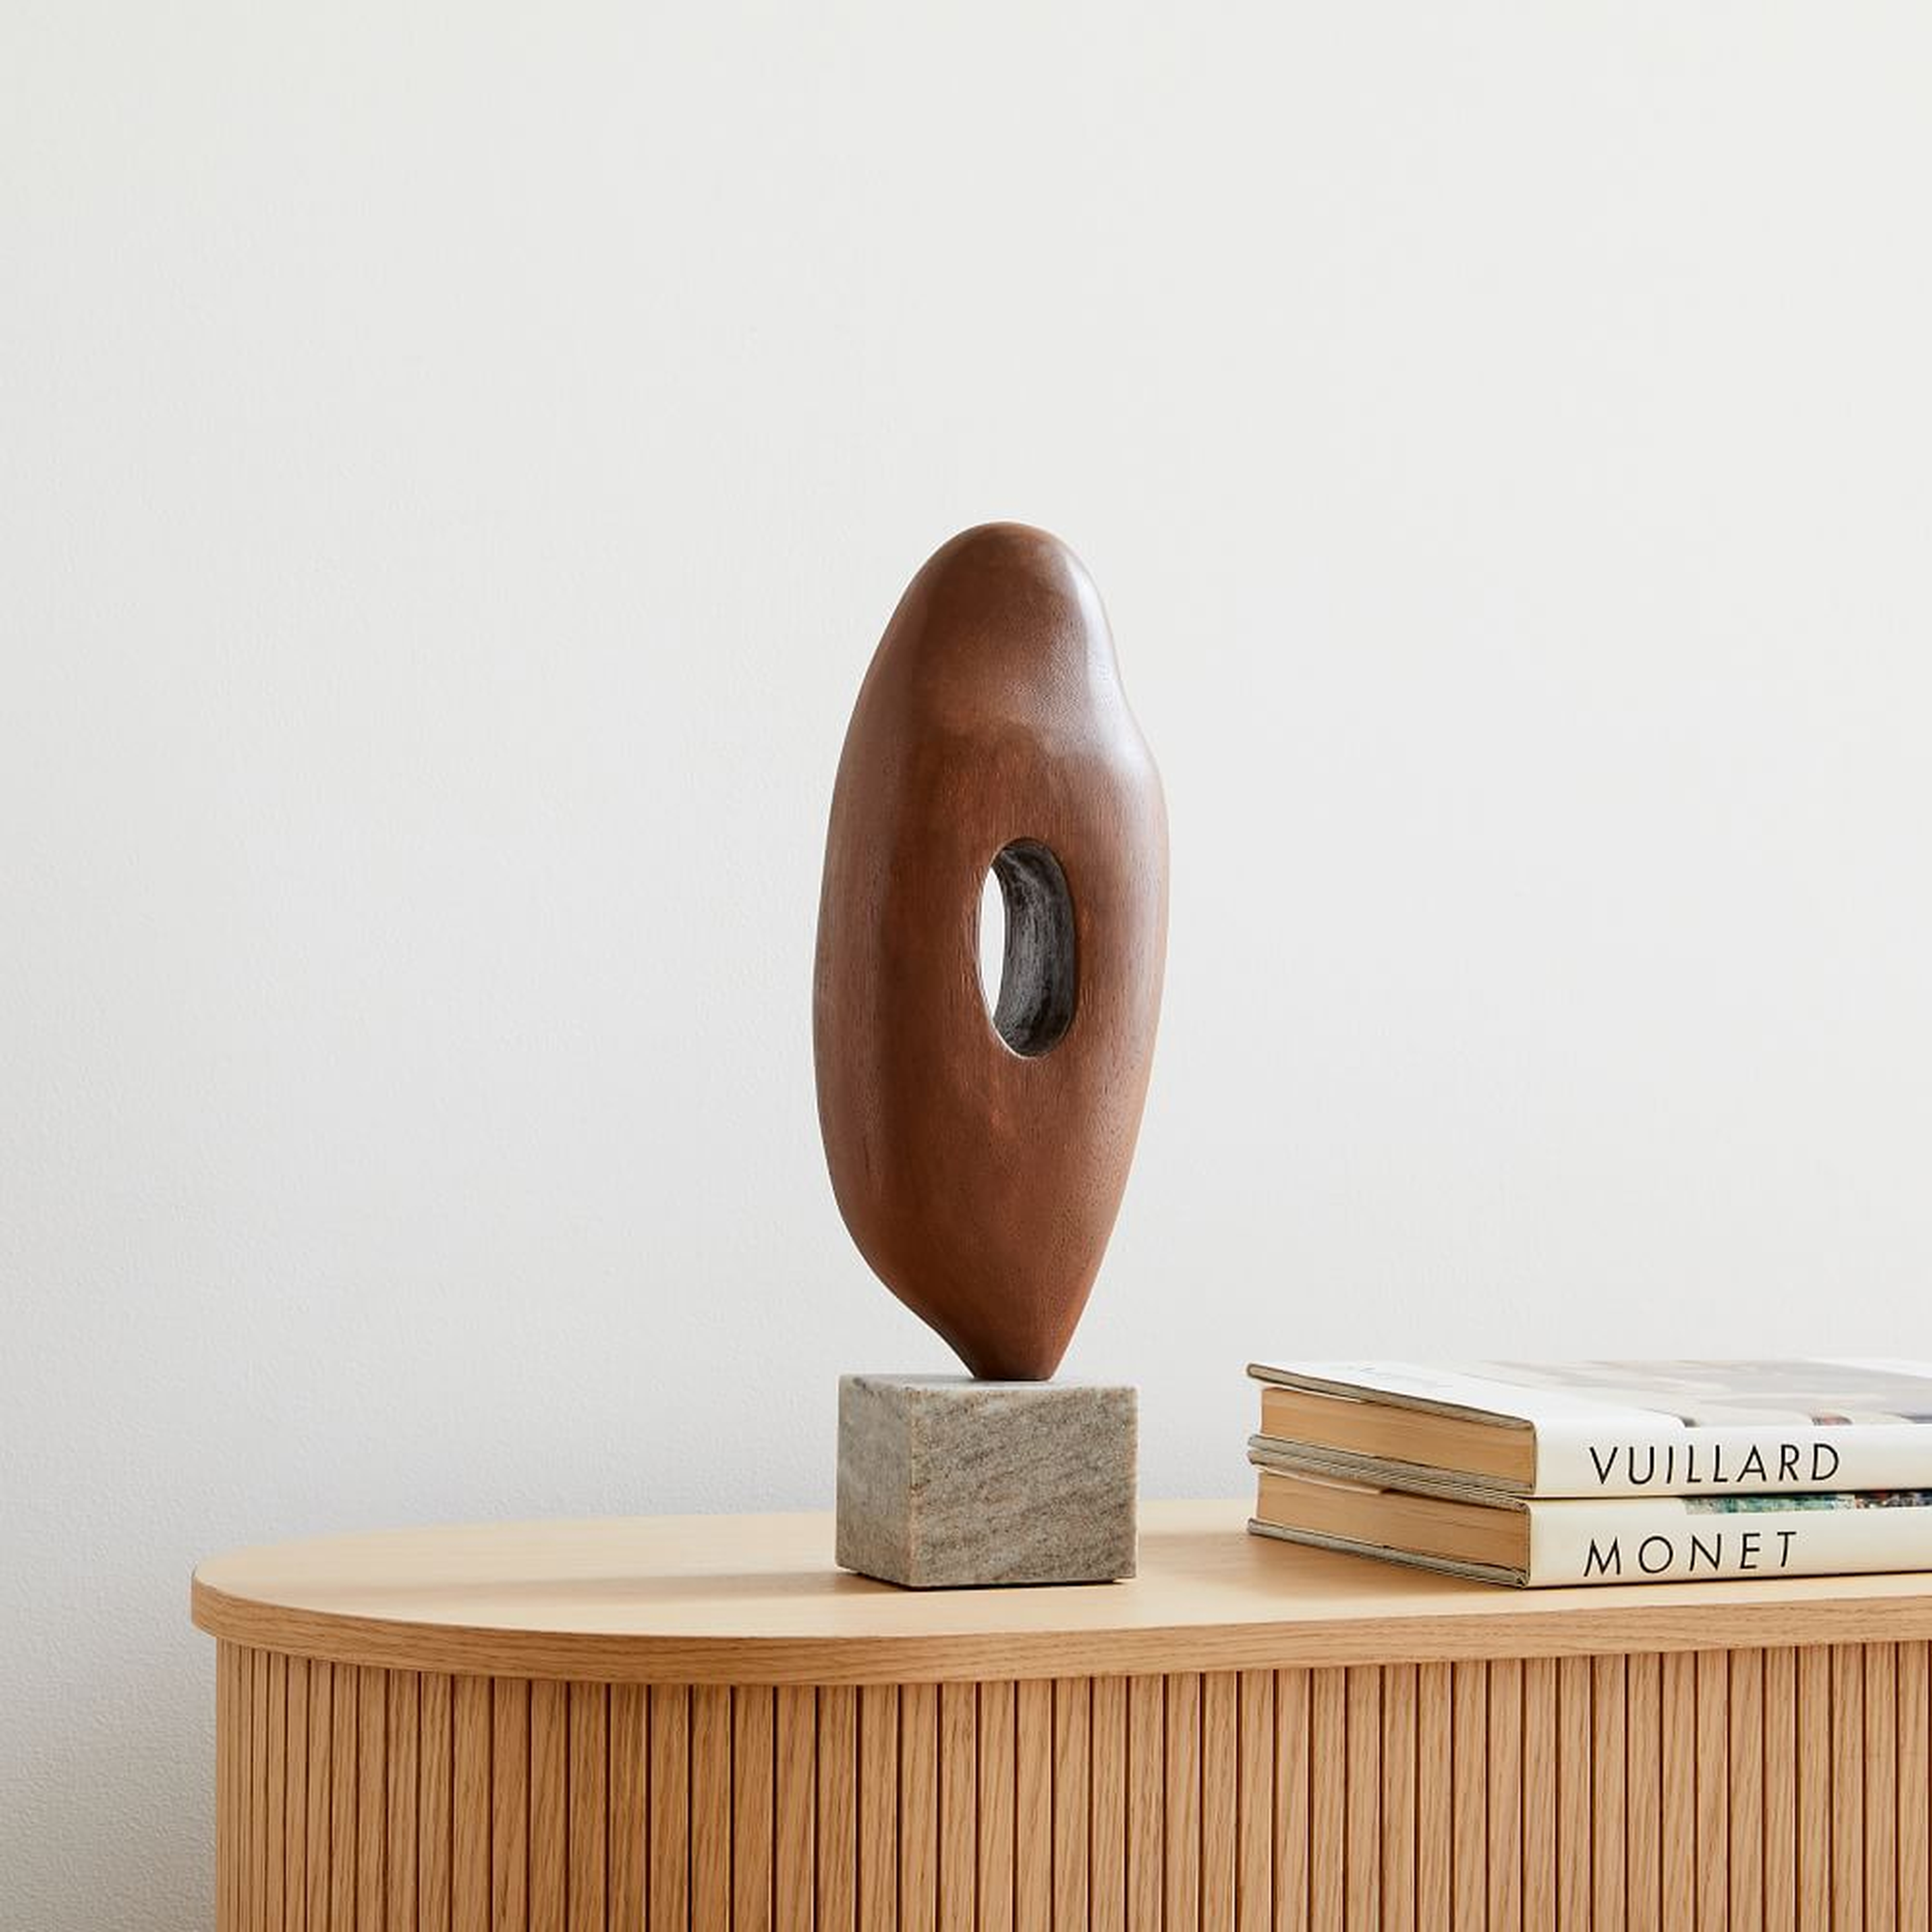 Alba Wood Sculptural Objects, Object, Walnut, Mixed Materials, Large - West Elm